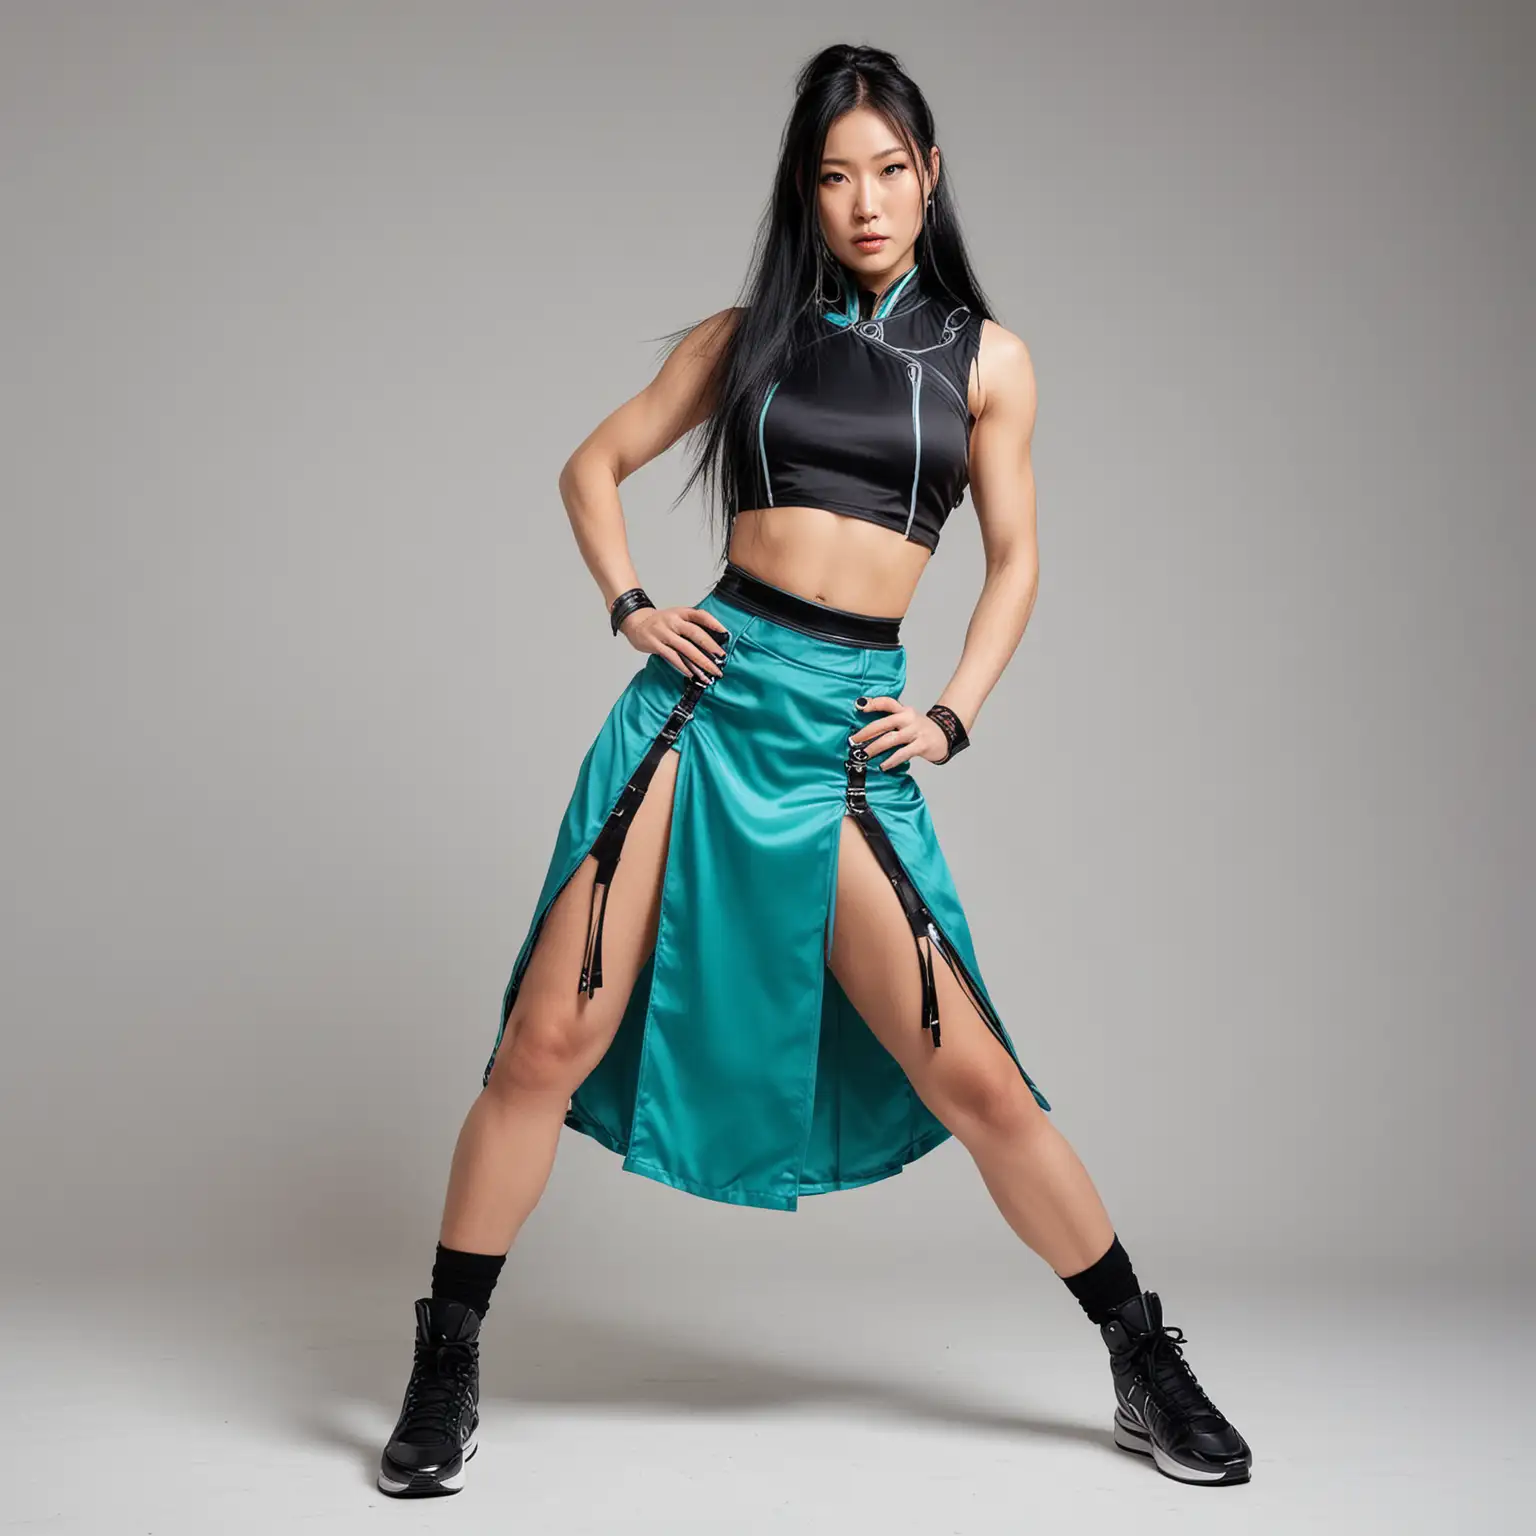 Strong beautiful Japanese woman, with white and black long hair, wearing sleeveless light-saturated-teal double thigh slit chun-li dress made of metal, black shoulderpads, exposed midriff, black sneakers, sneakers, white background